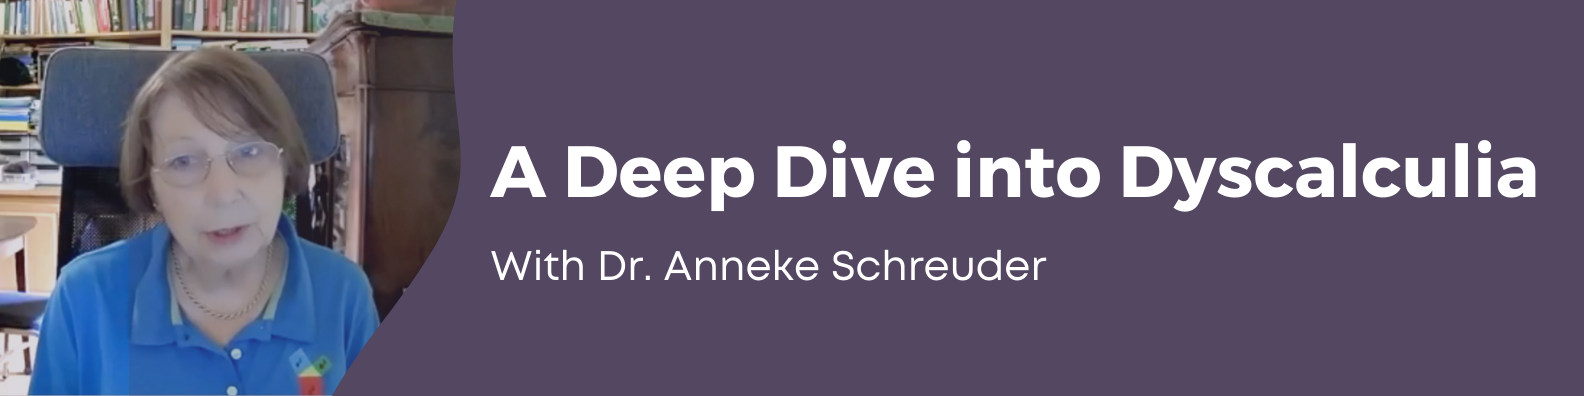 A Deep Dive to Dyscalculia with Dr. Anneke Schreuder